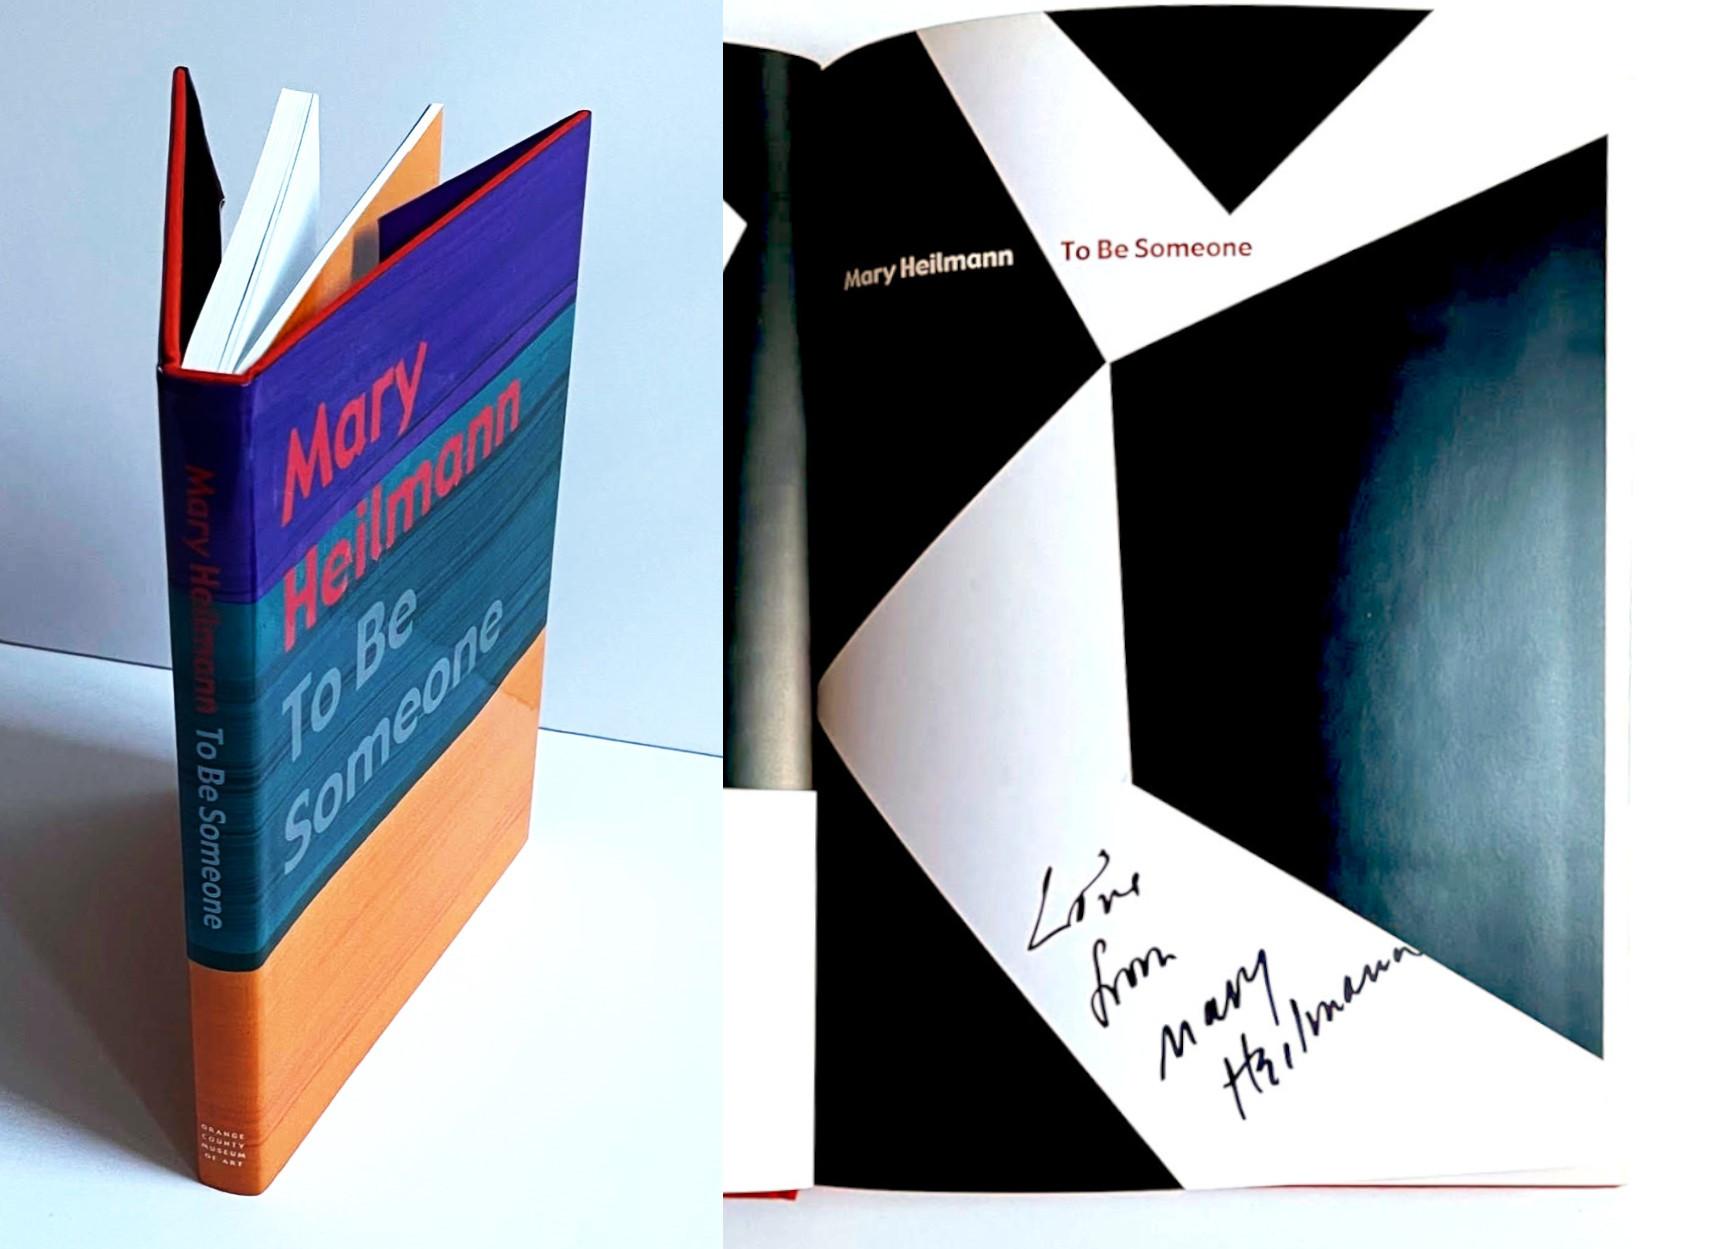 Monographe : To Be Someone (signé à la main et inscrit « Love from Mary Heilmann »